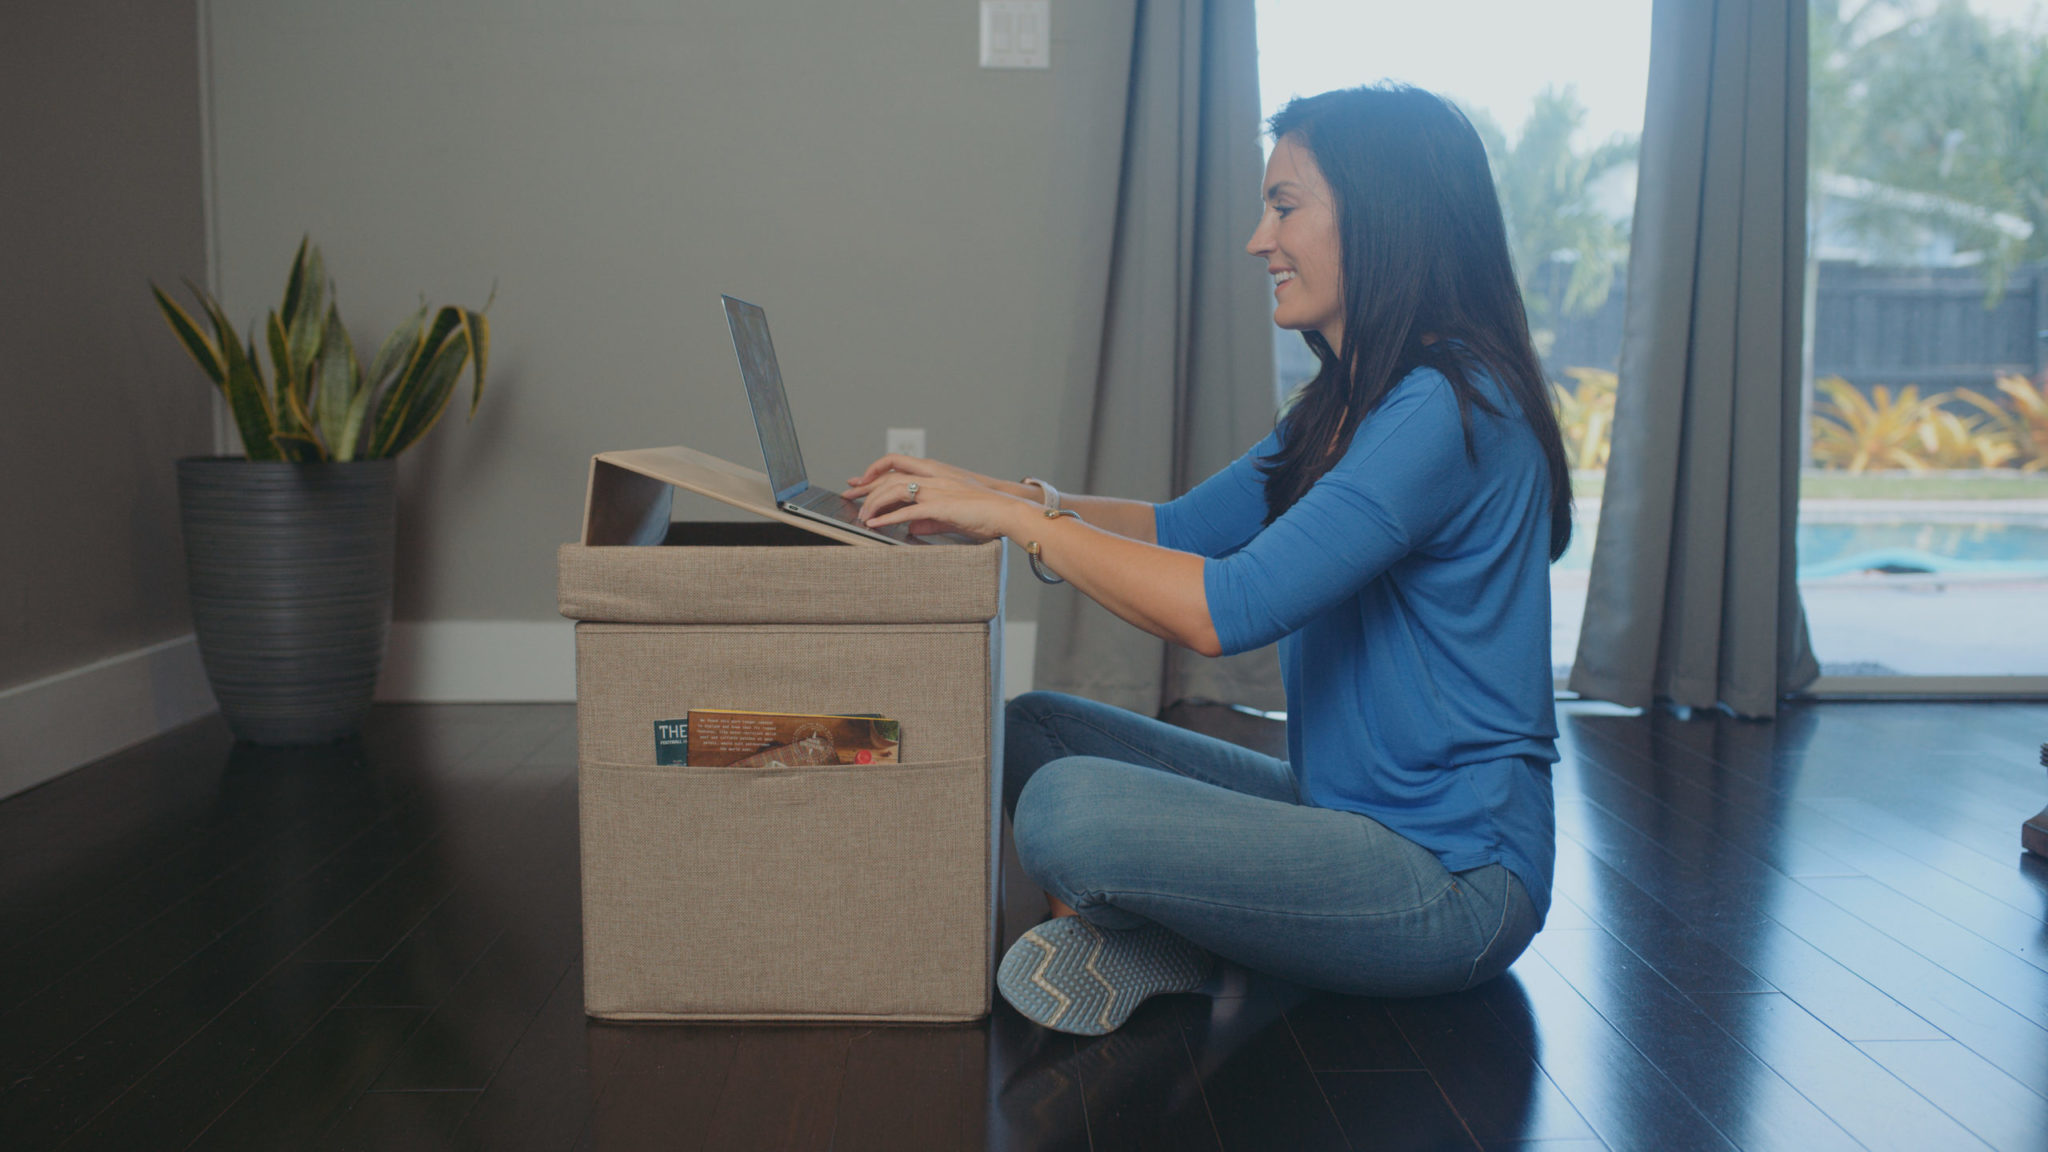 Audy Global Enterprise Ottoman Laptop Feature Fort Lauderdale Florida C&I Studios Side Profile Of Woman Wearing Blue Top And Jeans Sitting On The Floor Going Through A Box